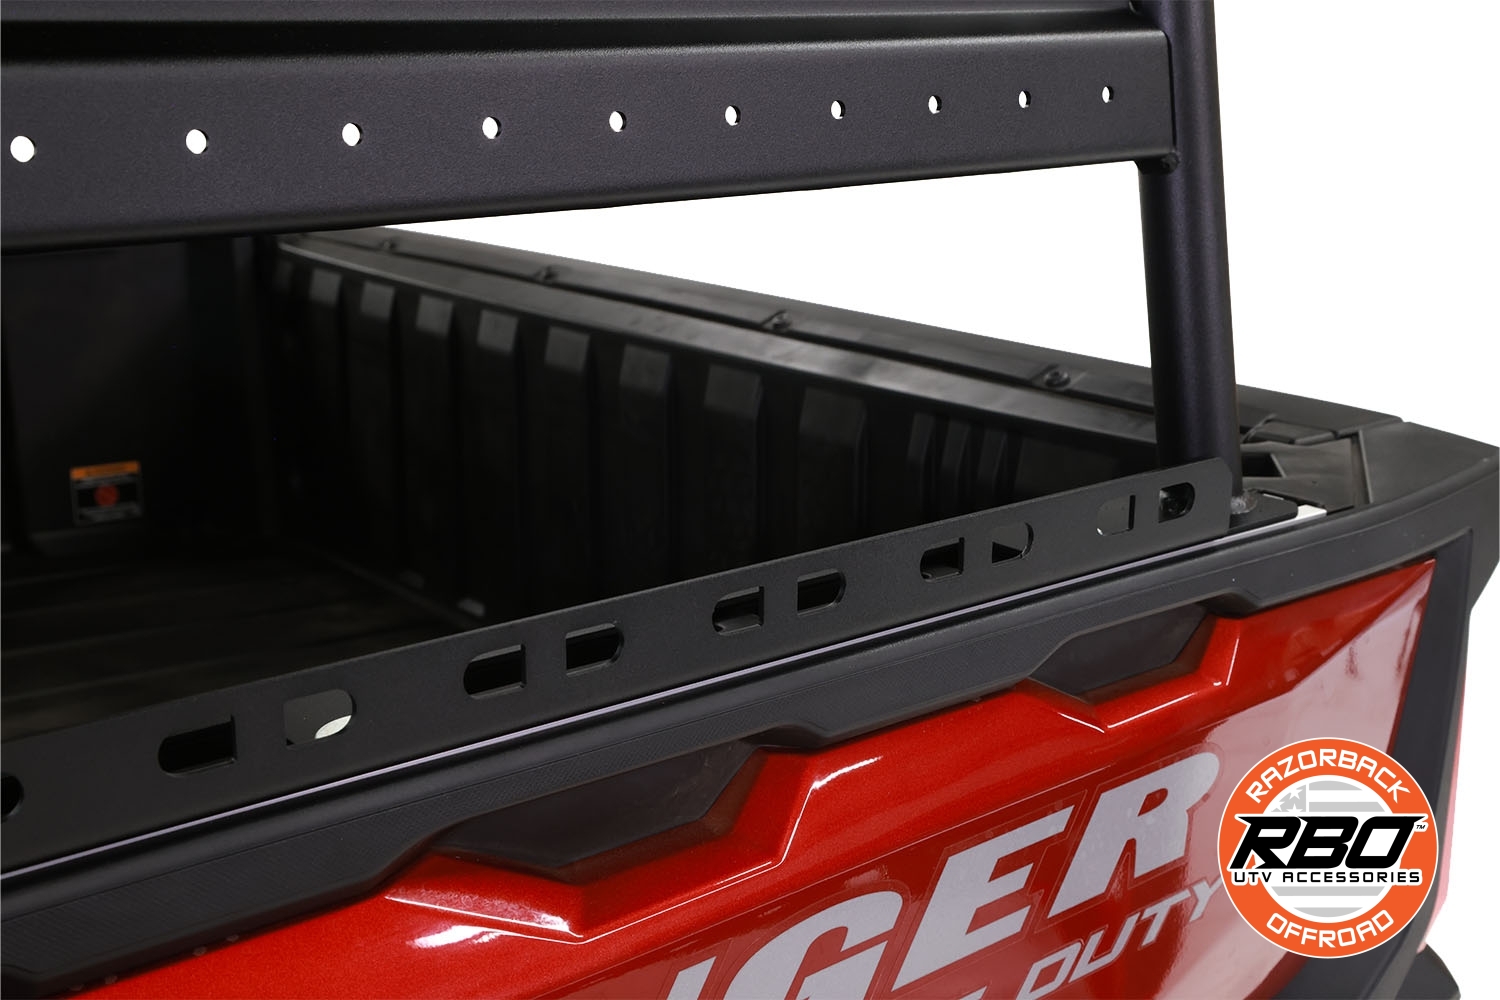 Side view of Razorback Offroad Cargo Rack showing steel frame and aluminum tray for Polaris Ranger XD 1500